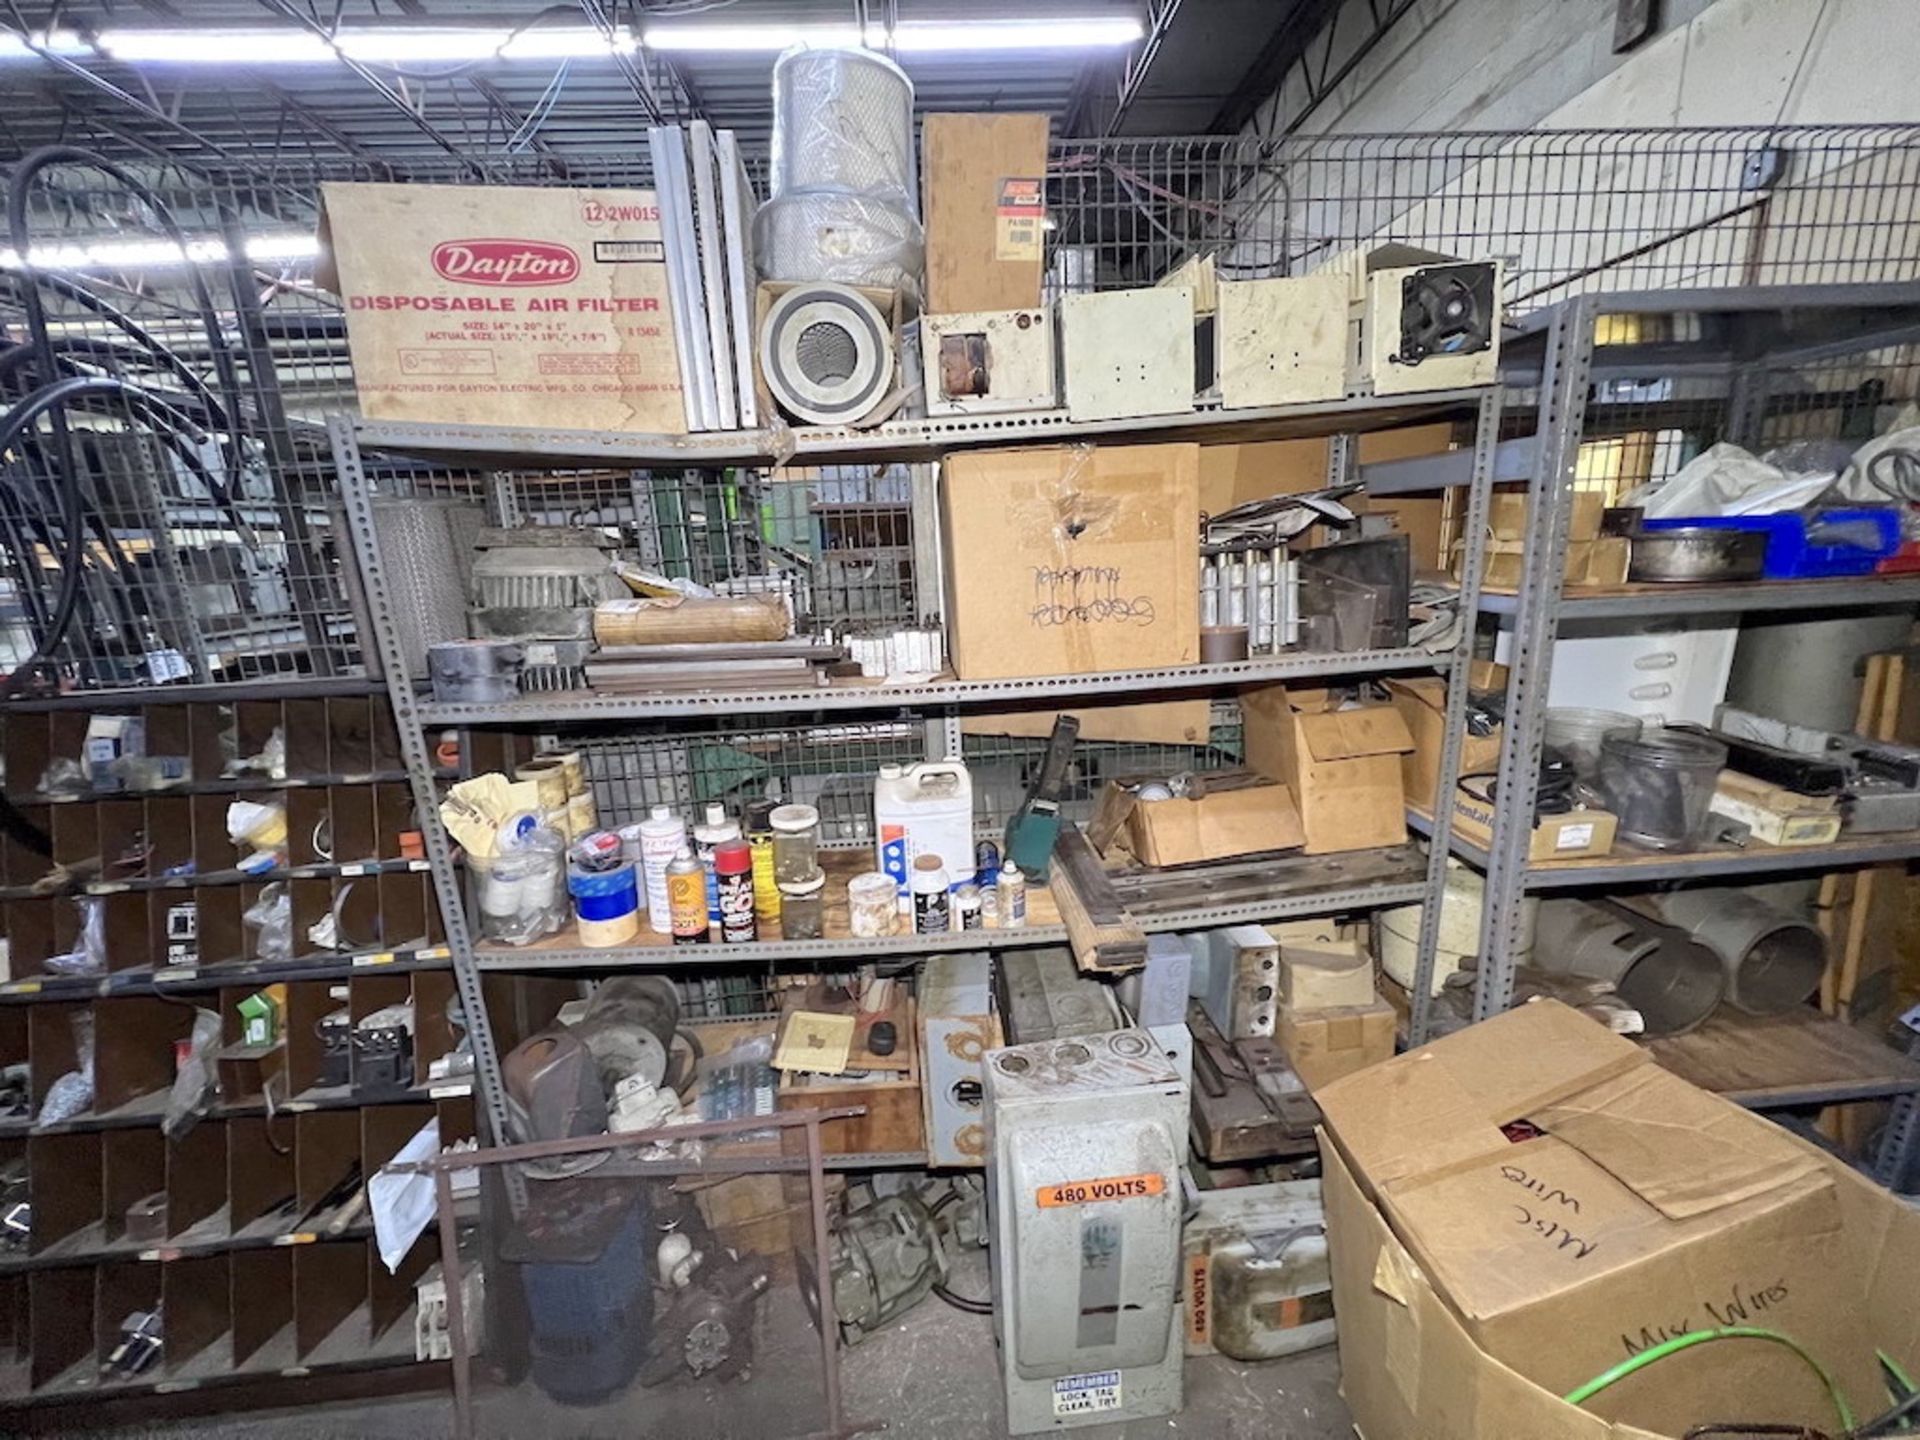 Remaining Contents of Parts Room - Image 19 of 60